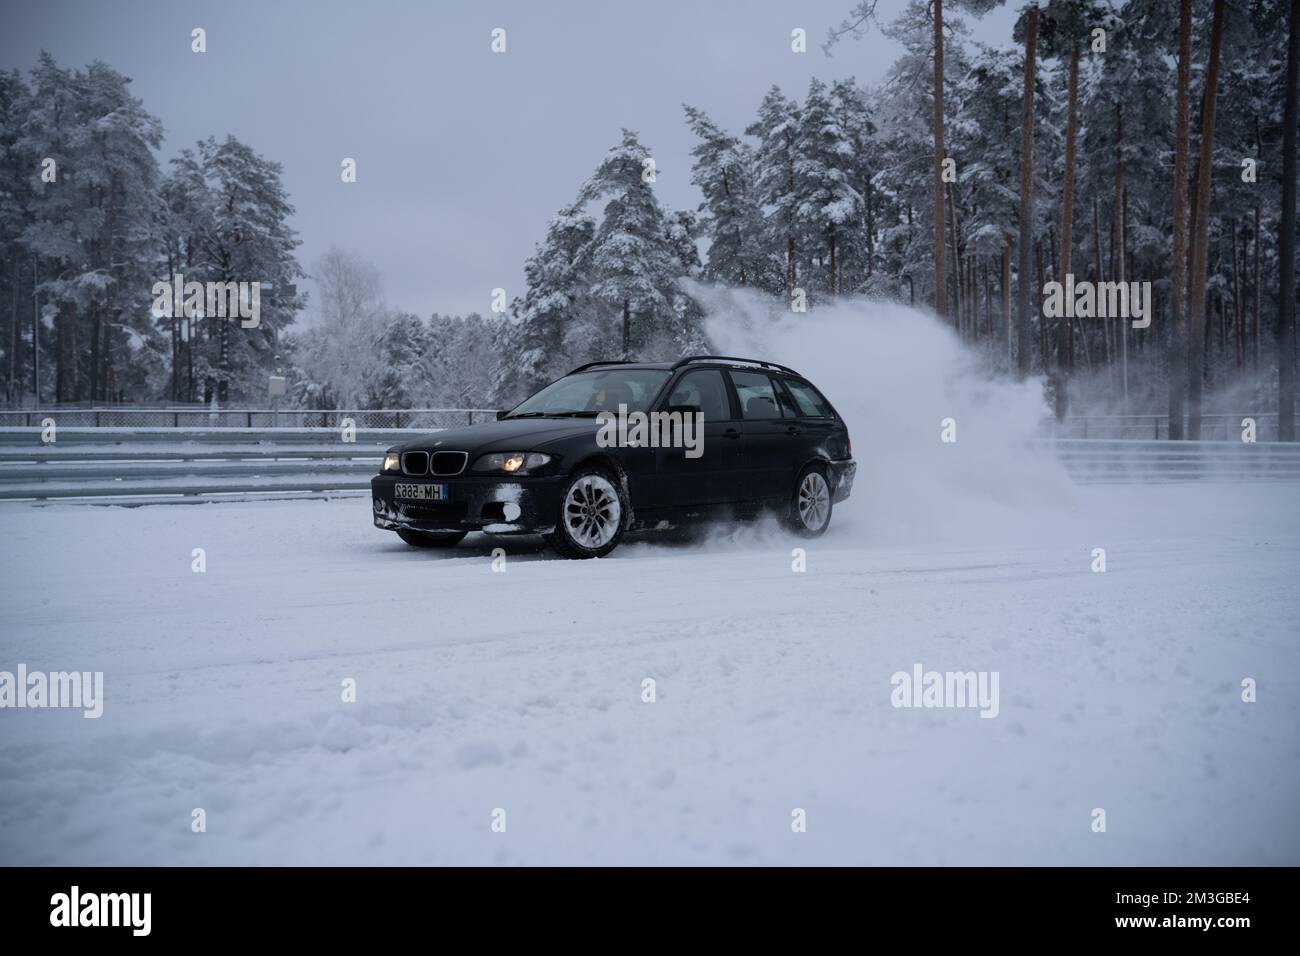 12-12-2022 Riga, Latvia  a car driving through a snow covered road in the middle of winter with trees in the background and a dusting of snow on the g Stock Photo